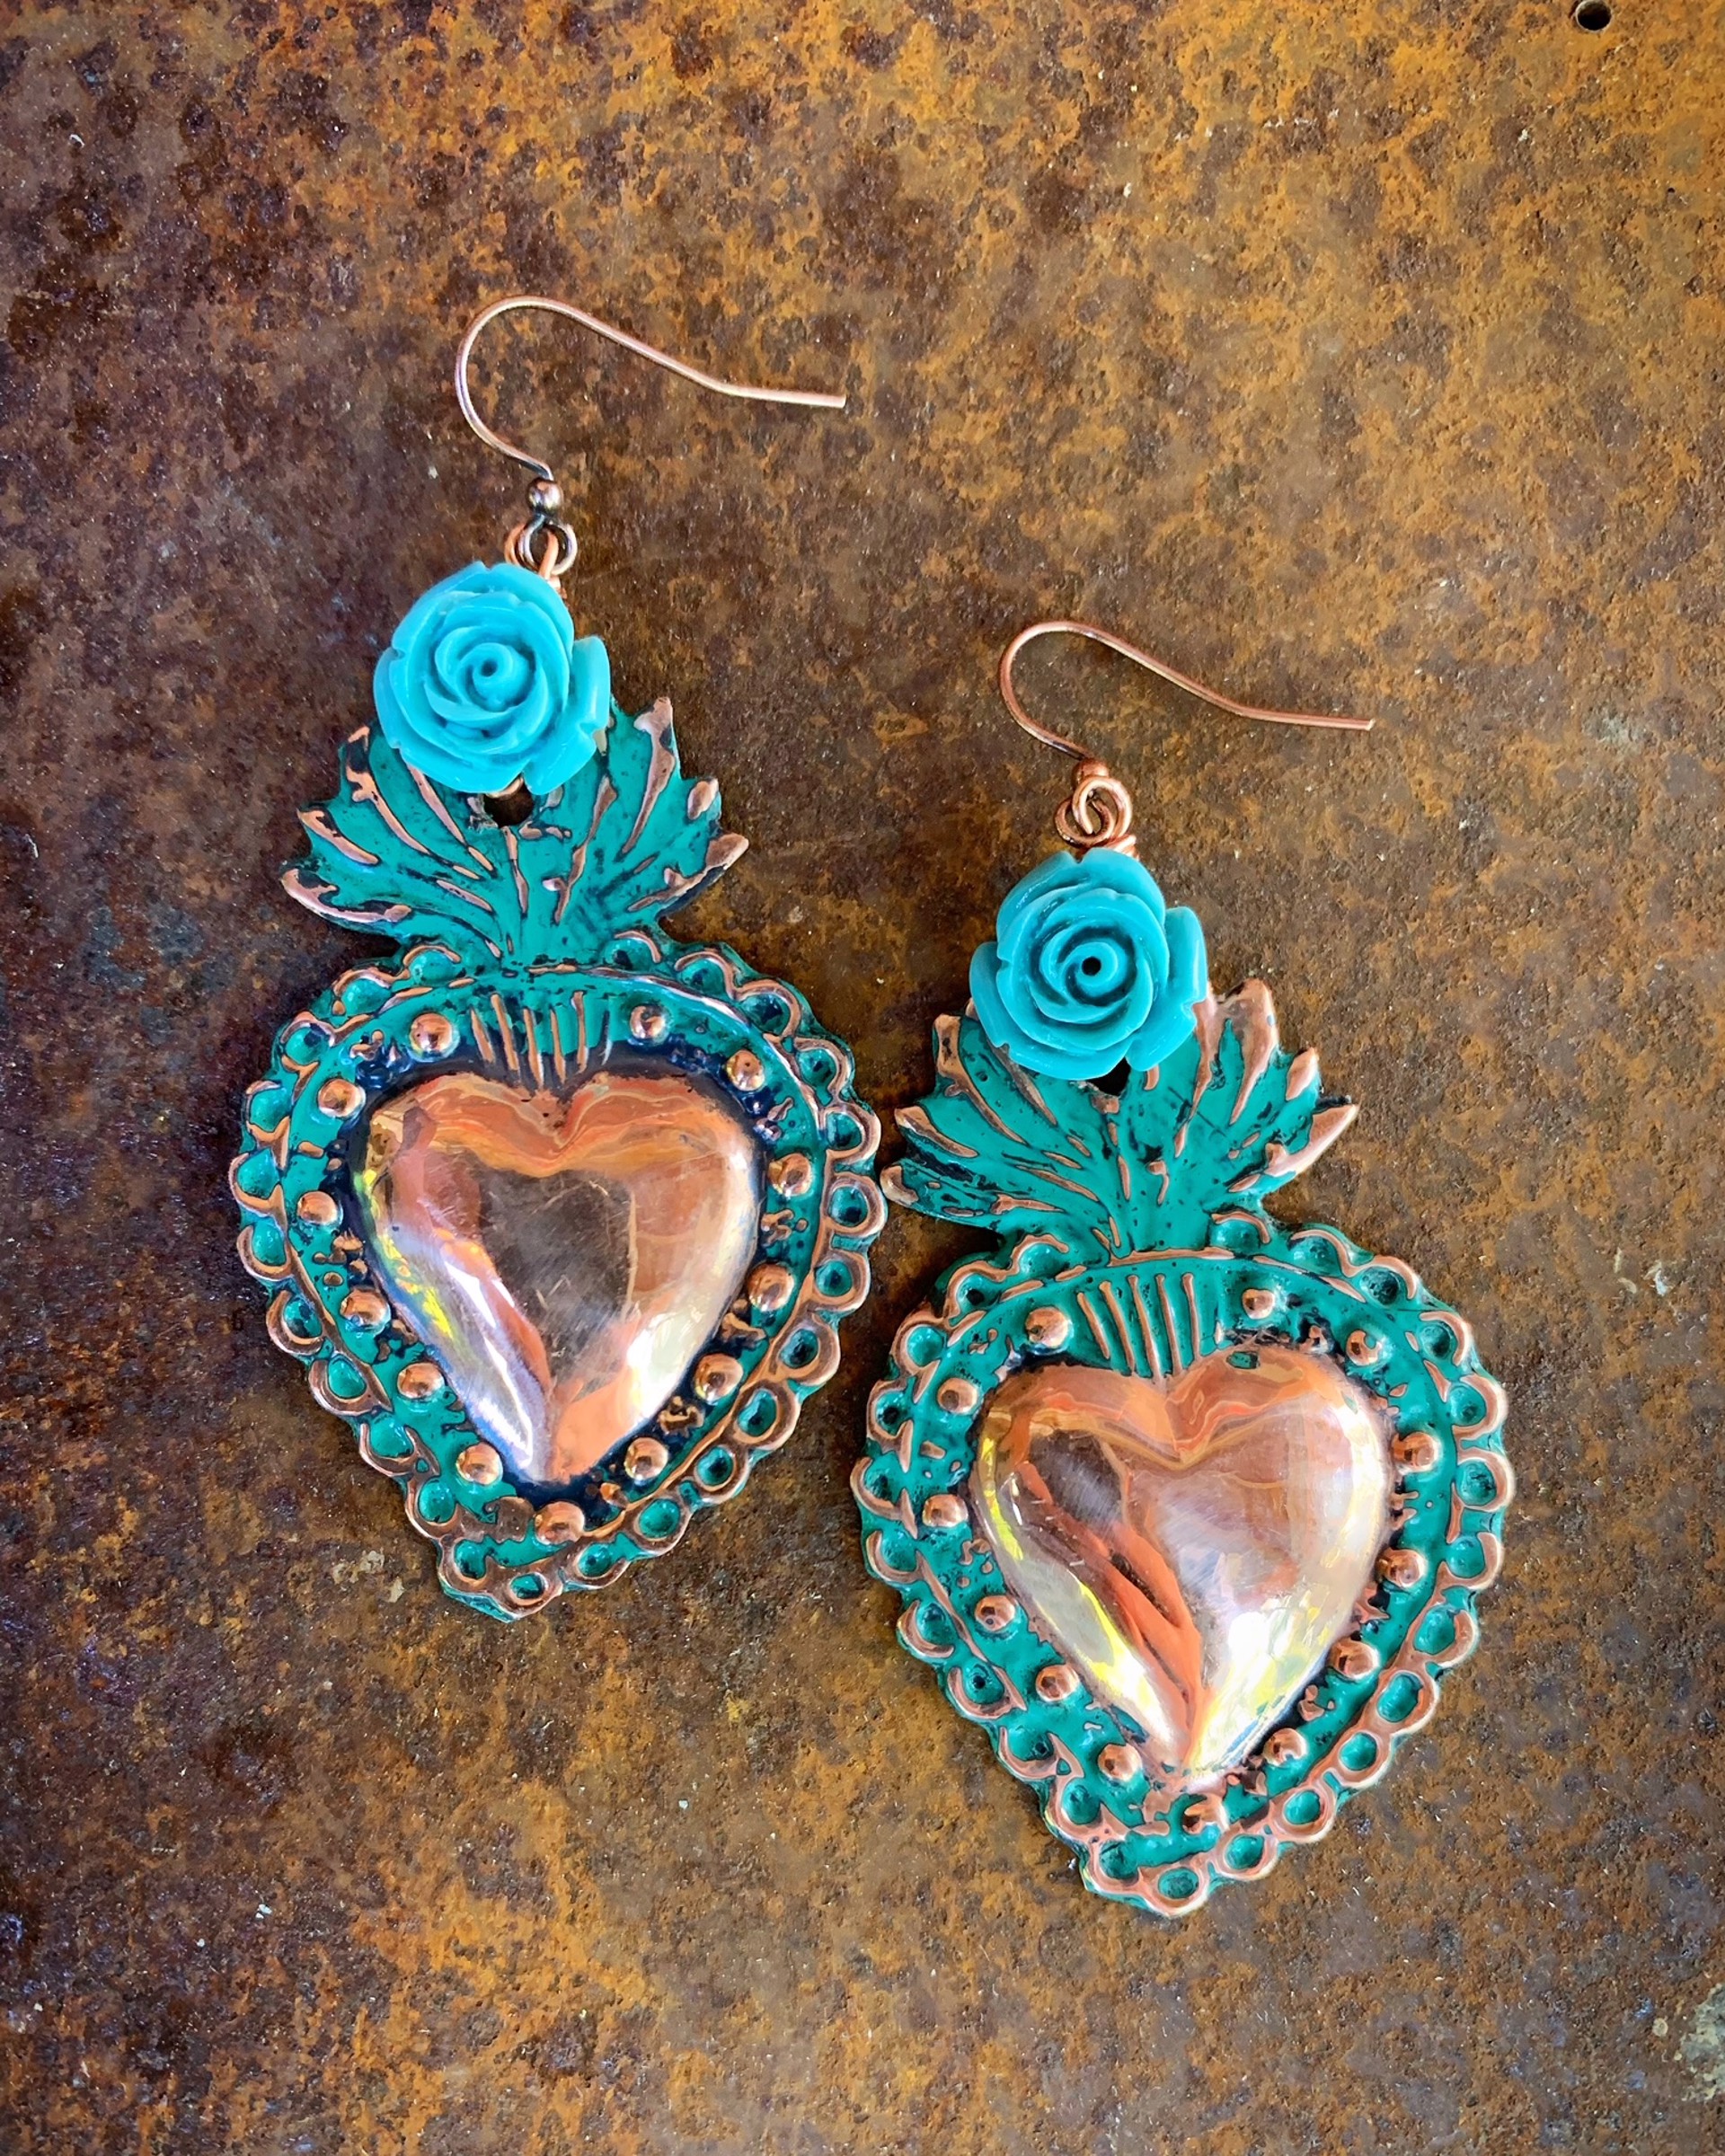 K851 Sacred Heart Earrings with Blue Roses by Kelly Ormsby